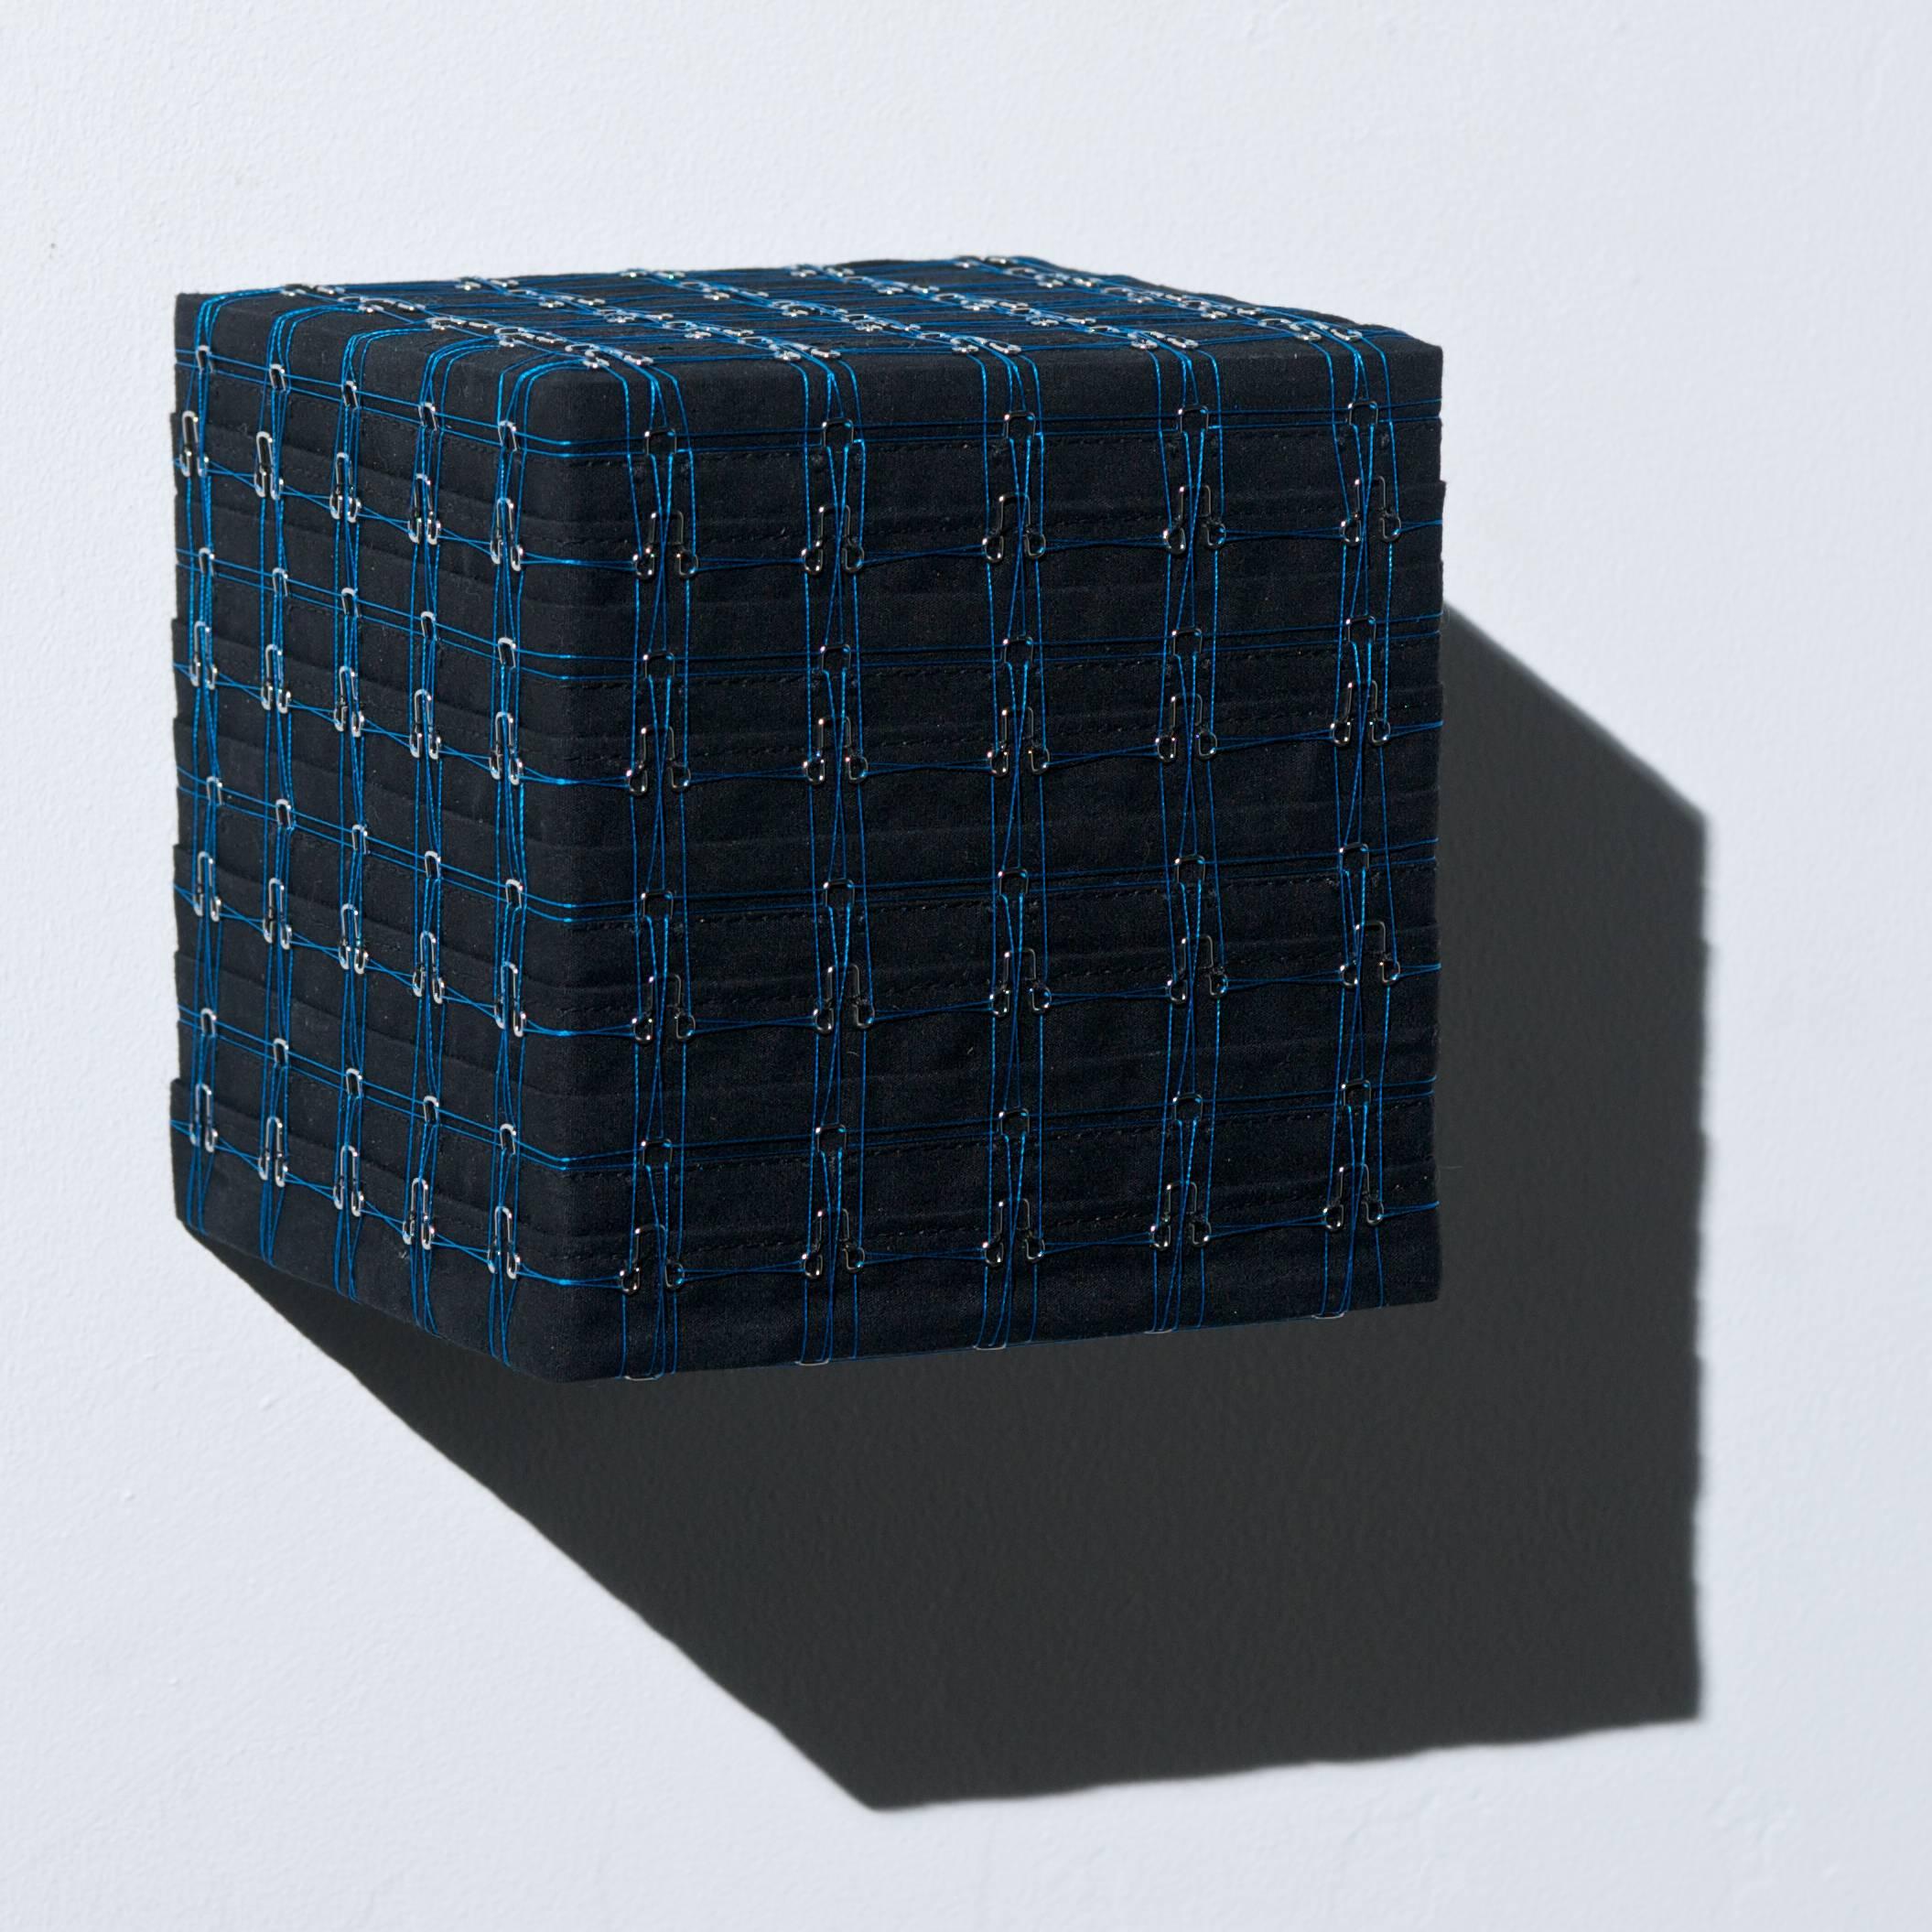 Black & Blue #3  - Sculpture by Denise Yaghmourian